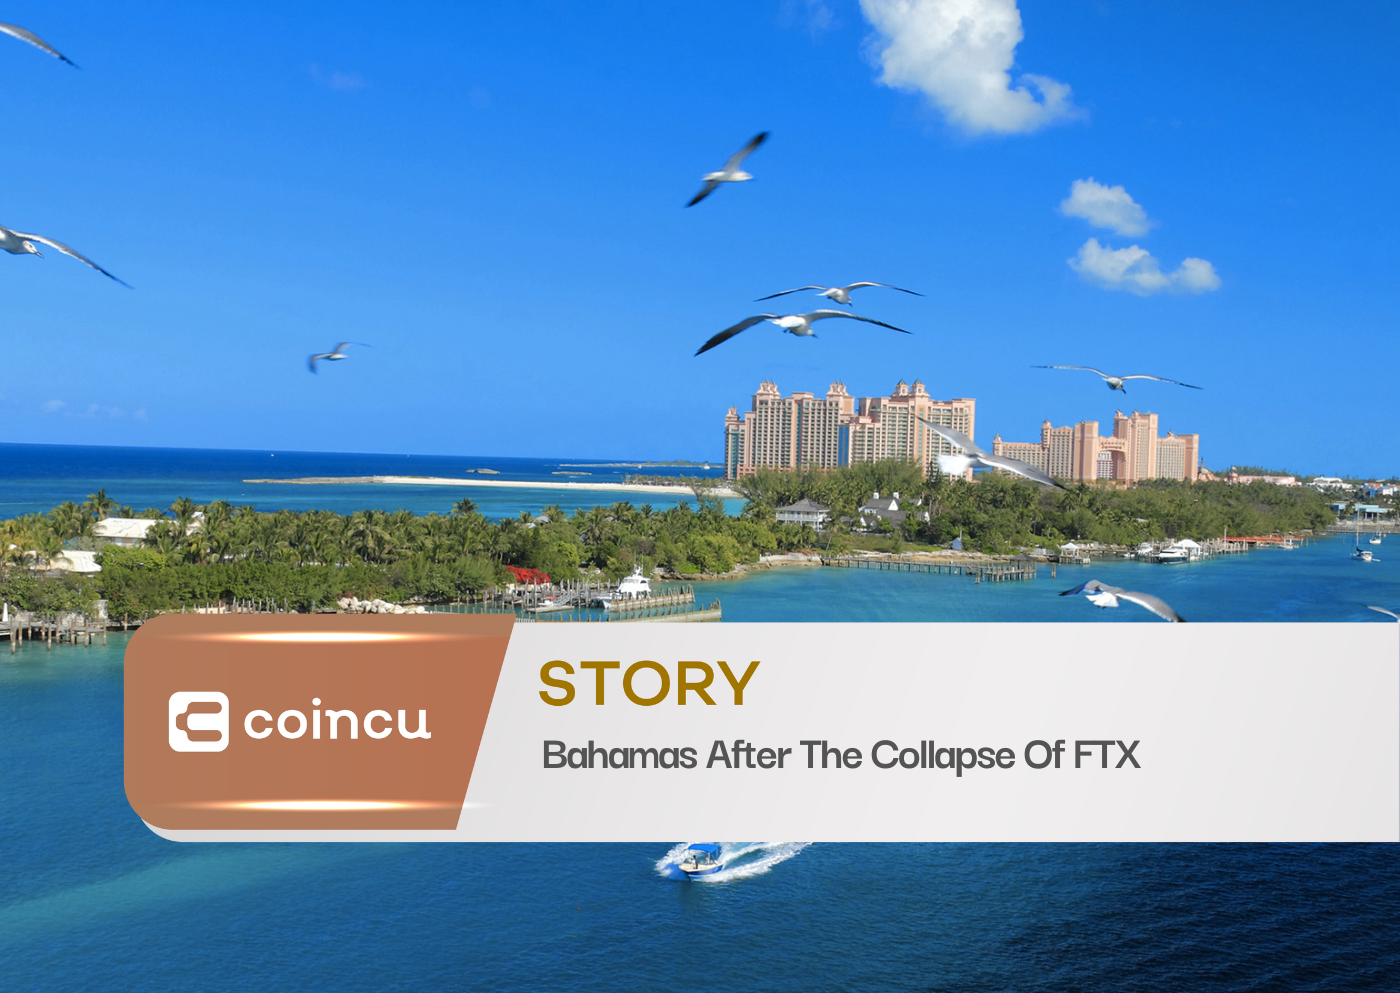 Bahamas After The Collapse Of FTX